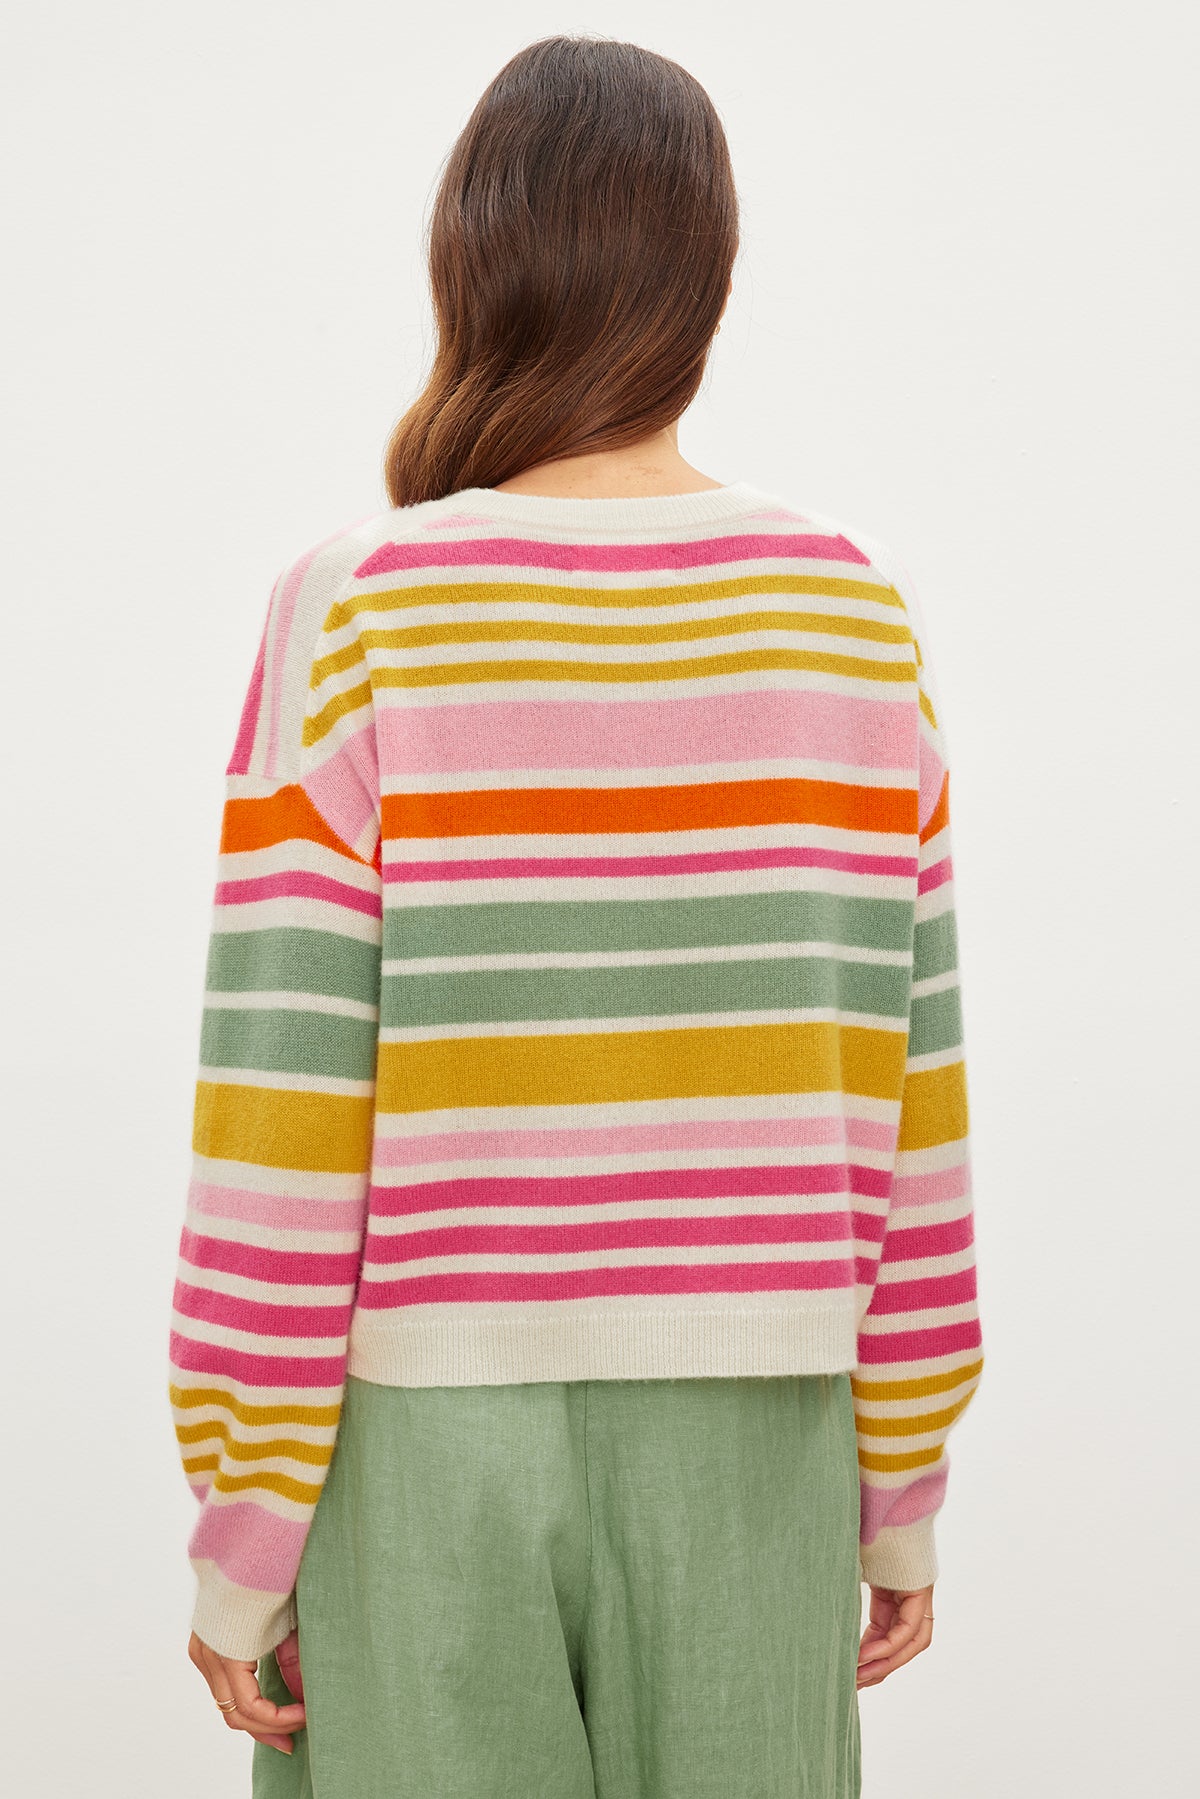 The back view of a woman wearing a Velvet by Graham & Spencer ANNY CASHMERE STRIPED CREW NECK SWEATER with multi-colored stripes.-35955370229953